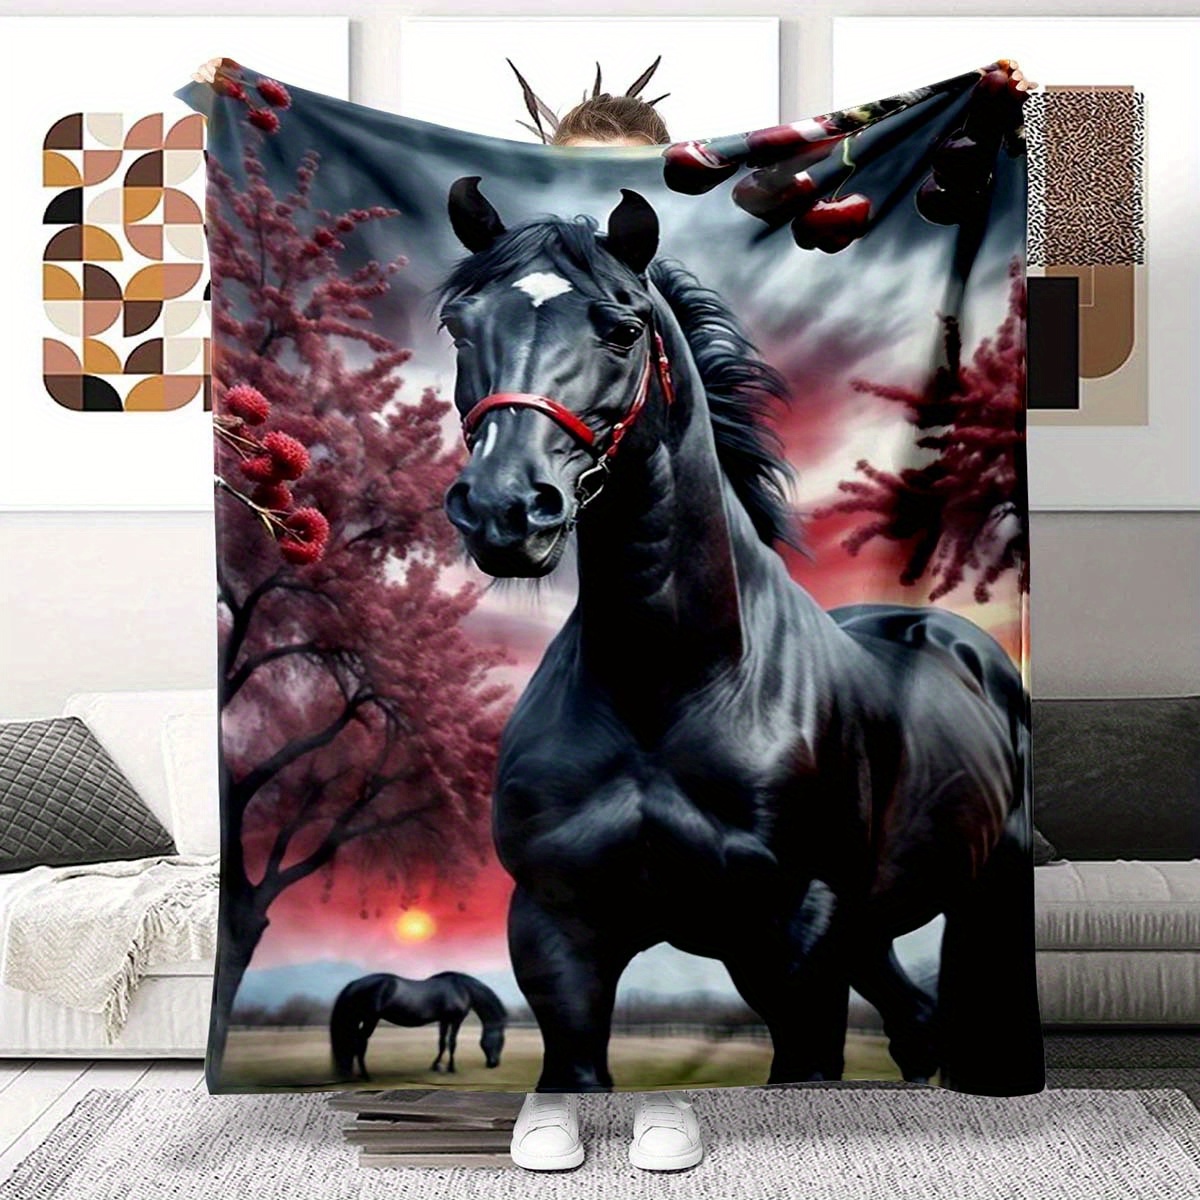 

1pc Cozy Horse Print Blanket - Lightweight Flannel Throw Blanket For Sofa, Bed, Travel, Camping, Livingroom, Office, Couch, Chair, Gifts For Family Or Friends